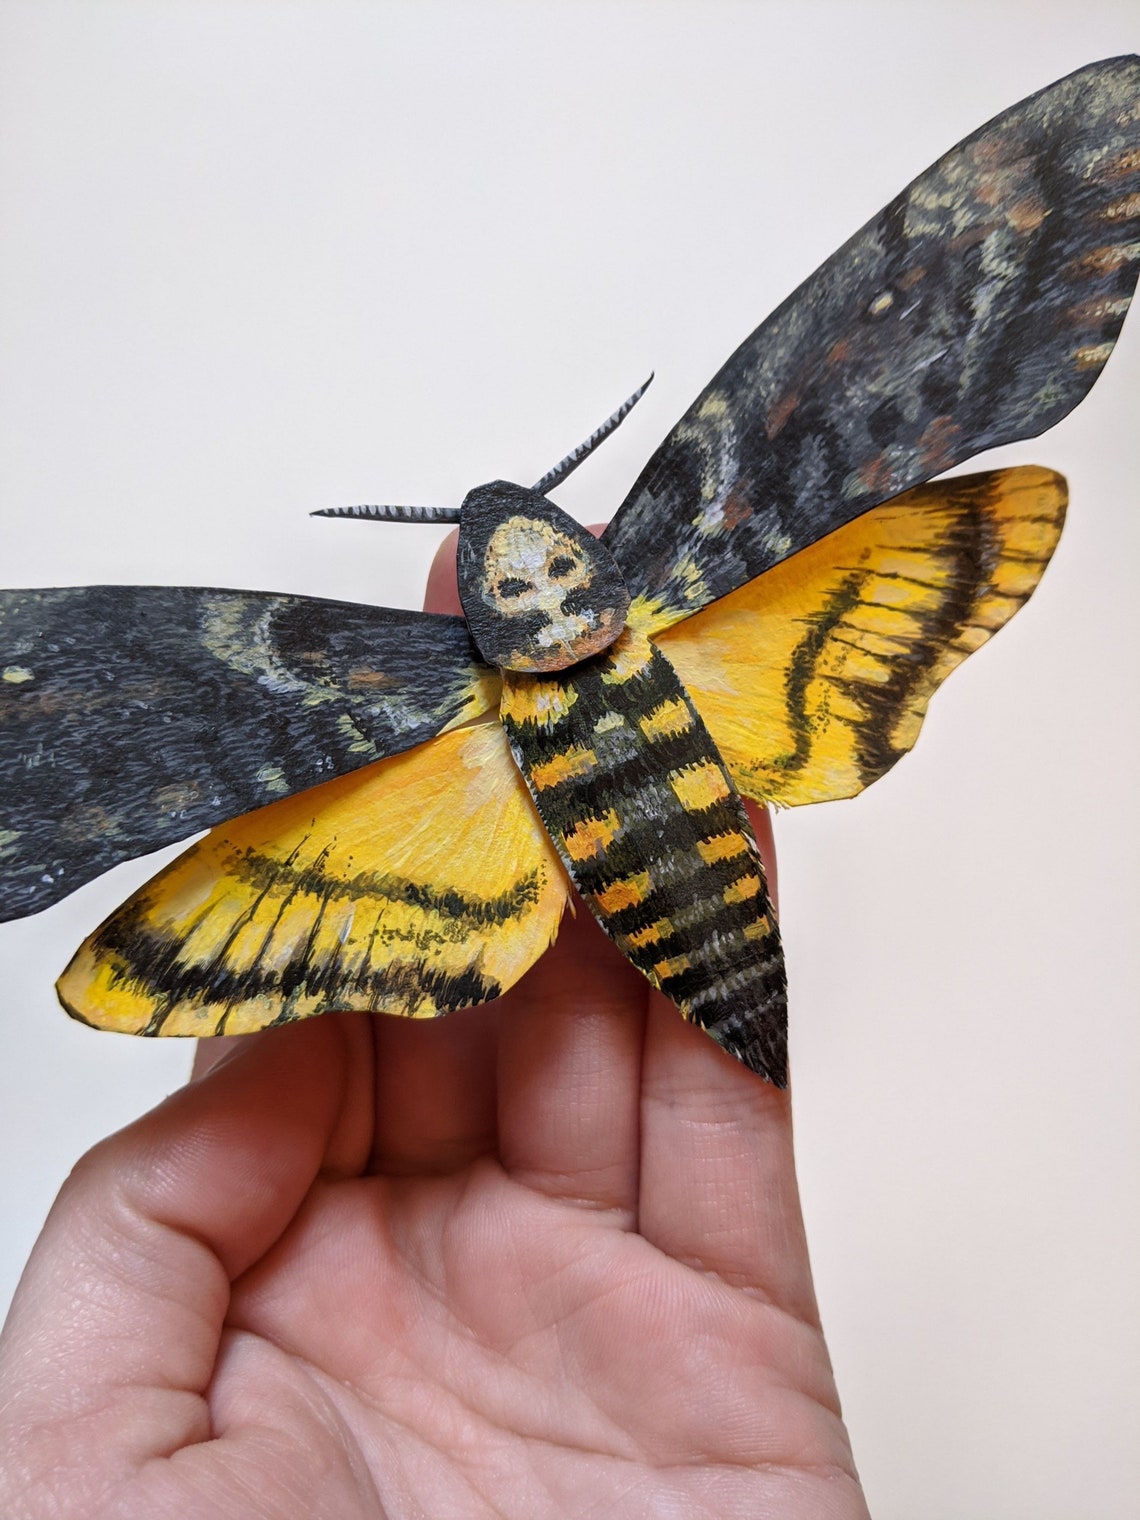 Deaths head moth/ faux taxidermy/ insect wall art sculpture/ | Etsy